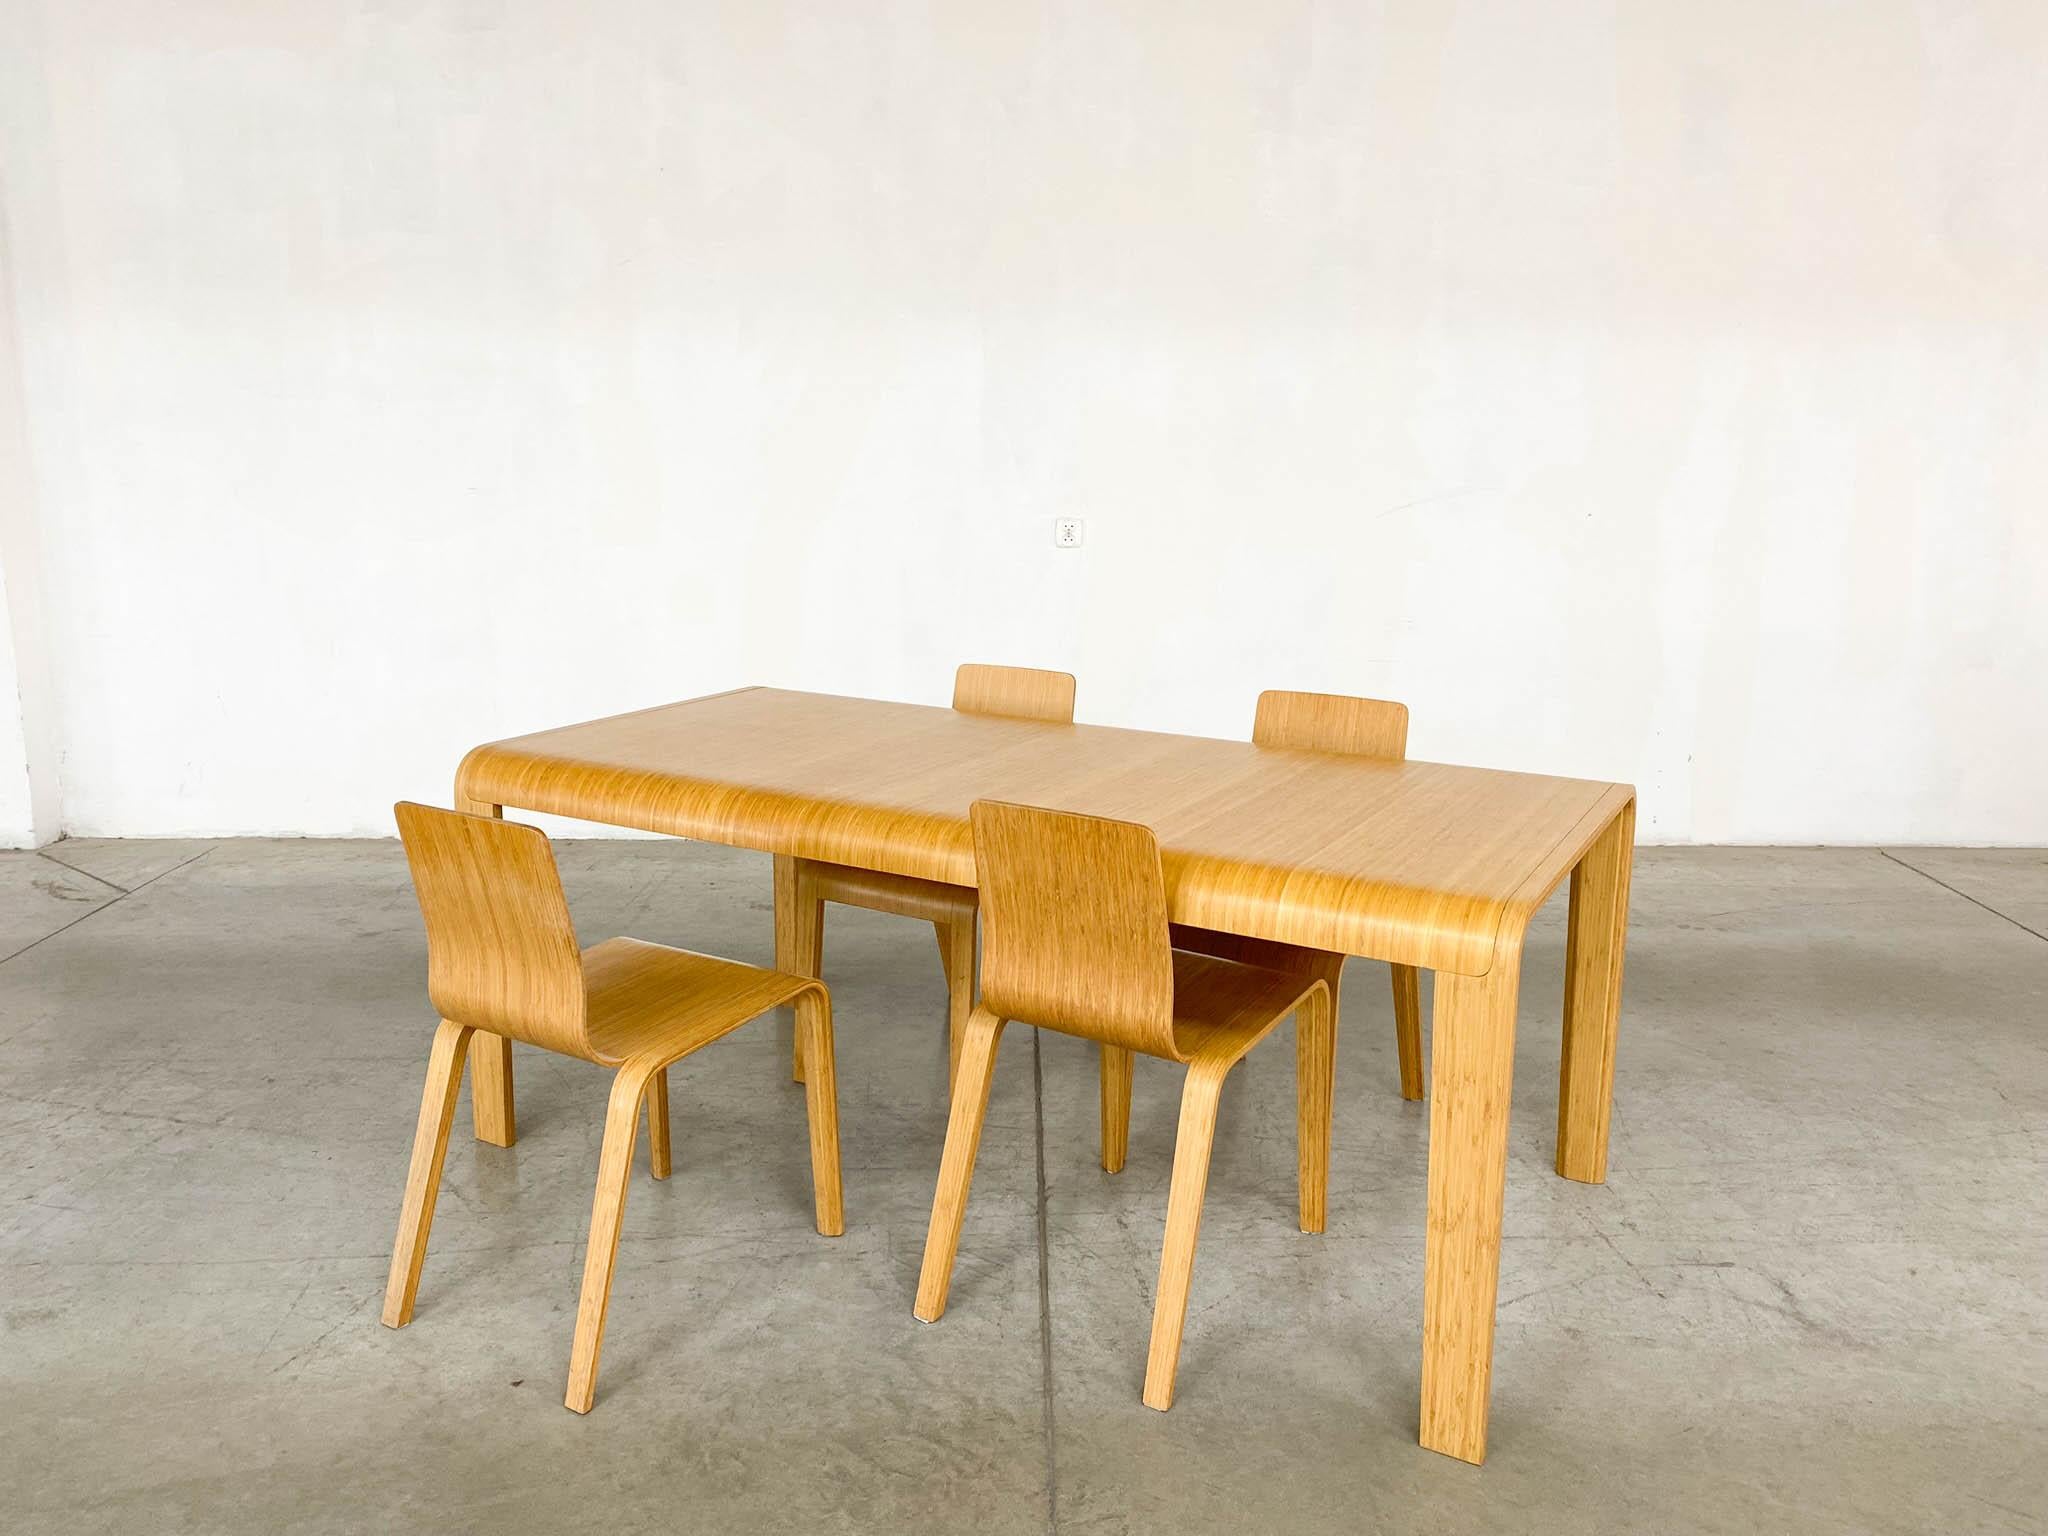 Bamboo Dining Set Table and Chairs by Henrik Tjaerby for Artek Studio, Set of 5 For Sale 4